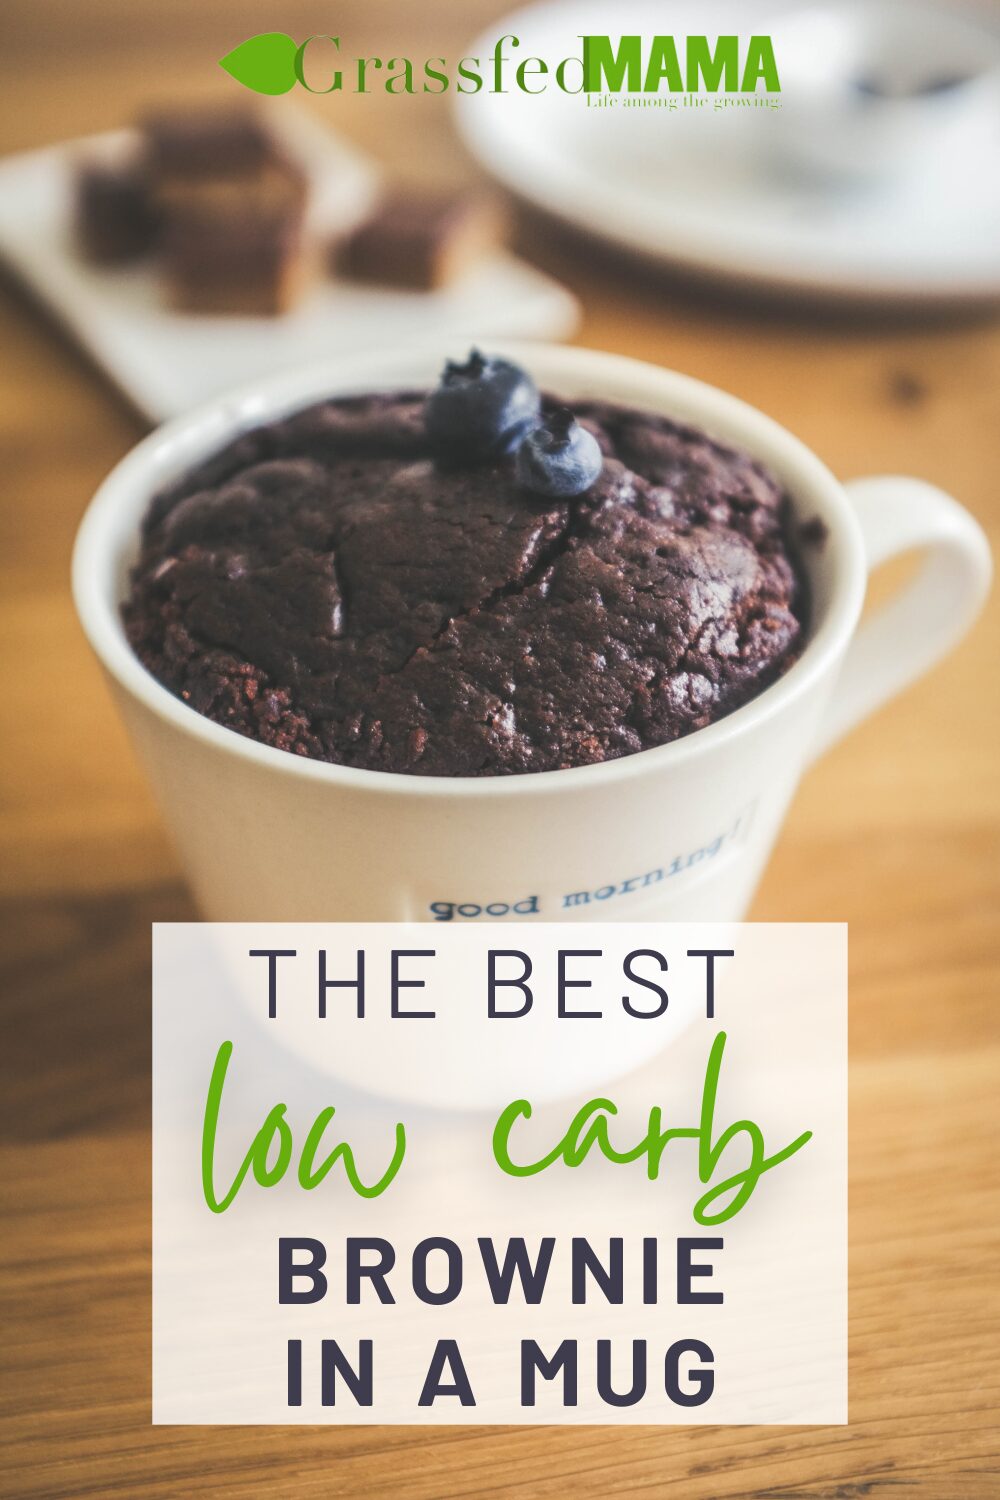 The Best Low Carb Brownie in a Mug